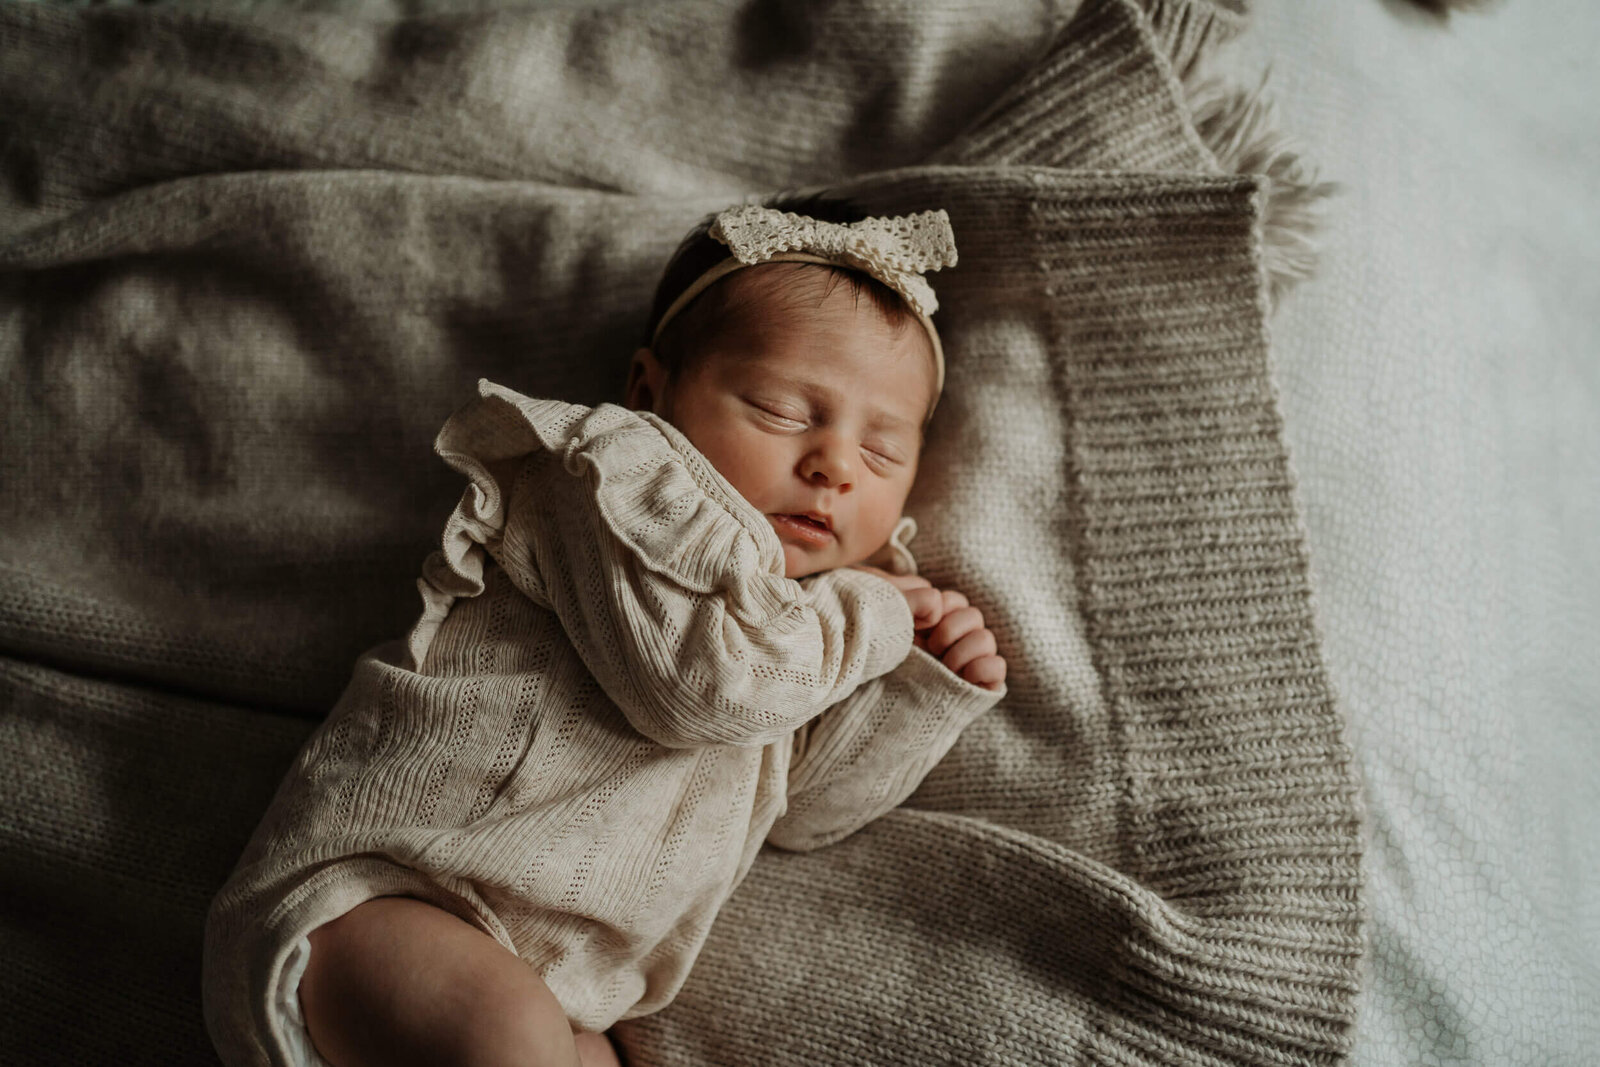 Newborn baby girl with beige knit bowsleeping on a bed with beige blankets